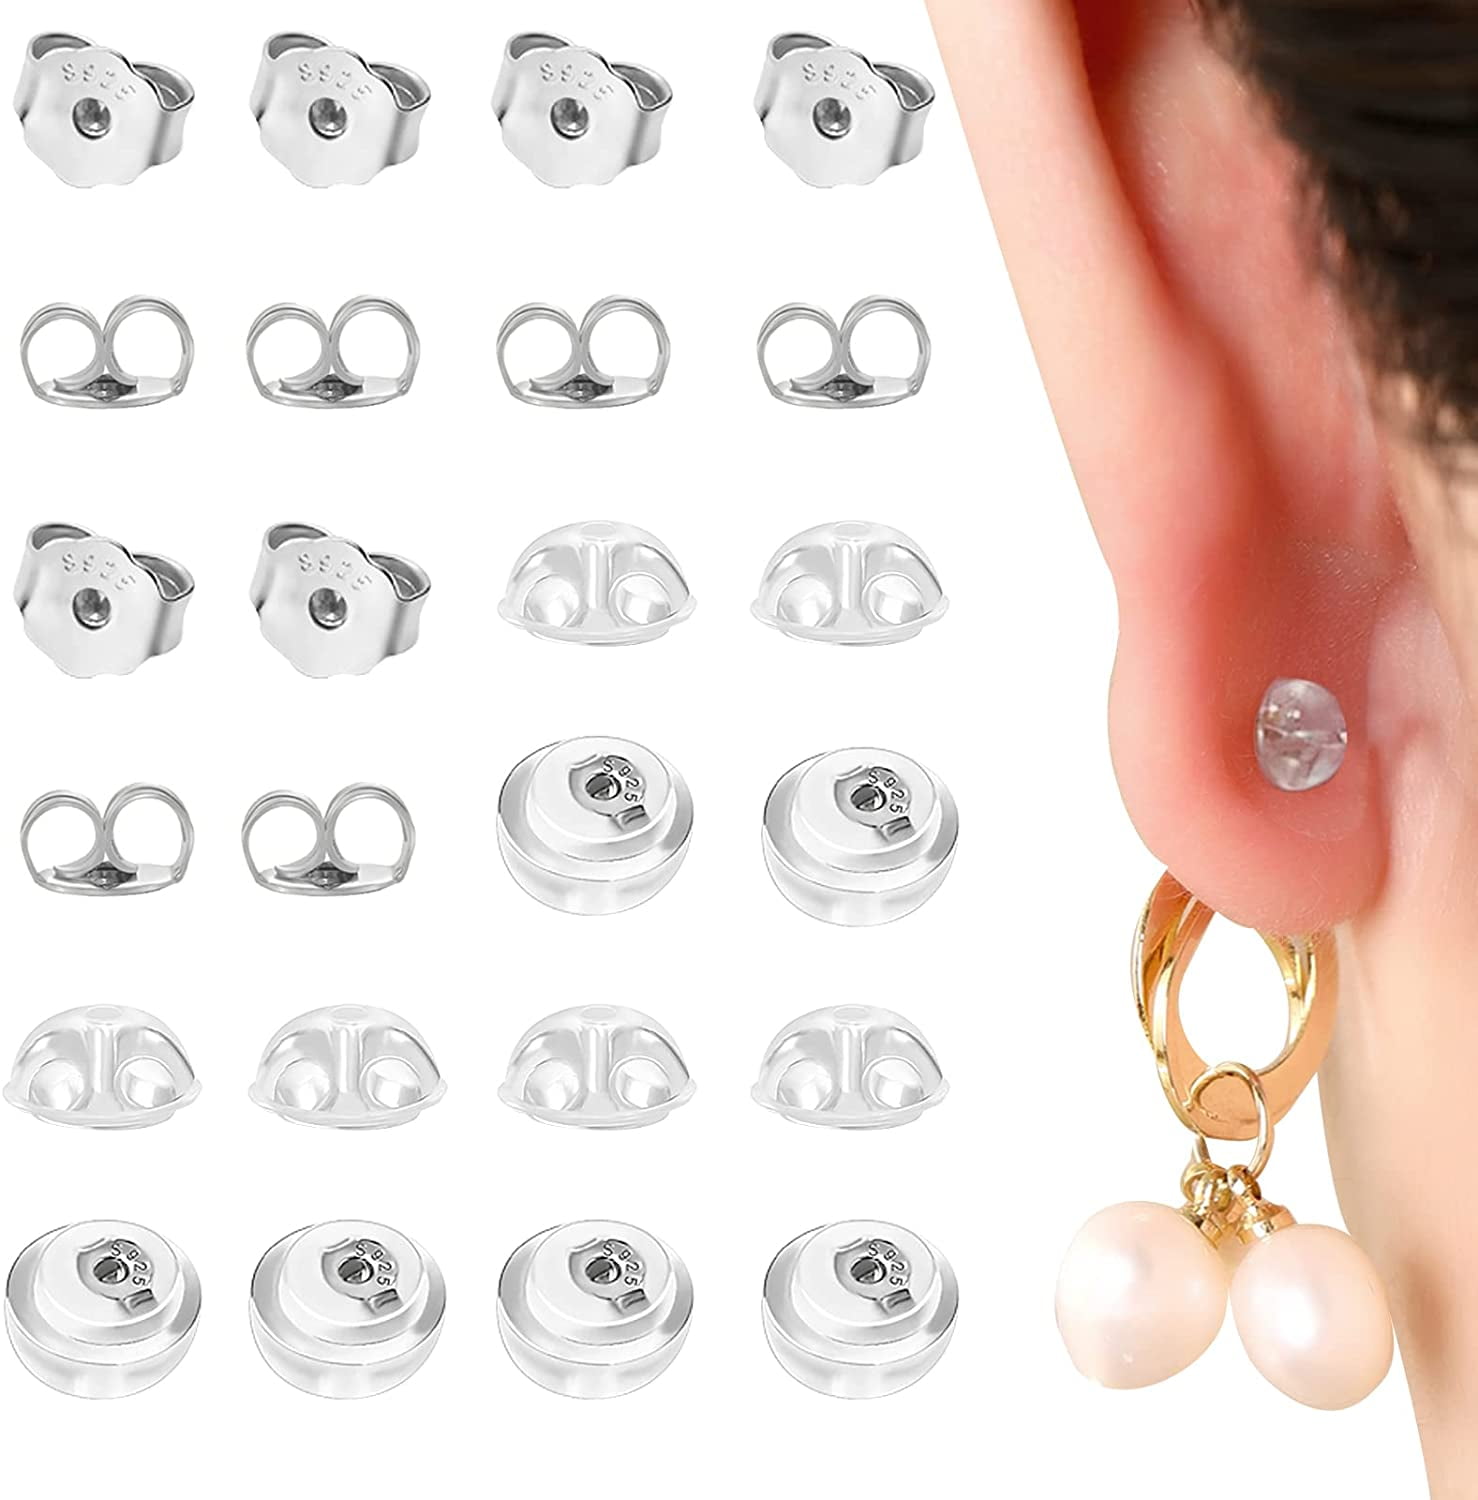 4 Pcs Earring Lifters, Golden Plated Love Earring Backs For Heavy Earring,  Hypoallergenic Silicone Earring Supports Adjustable Secure Earring Backs  For Studs Droopy Ears